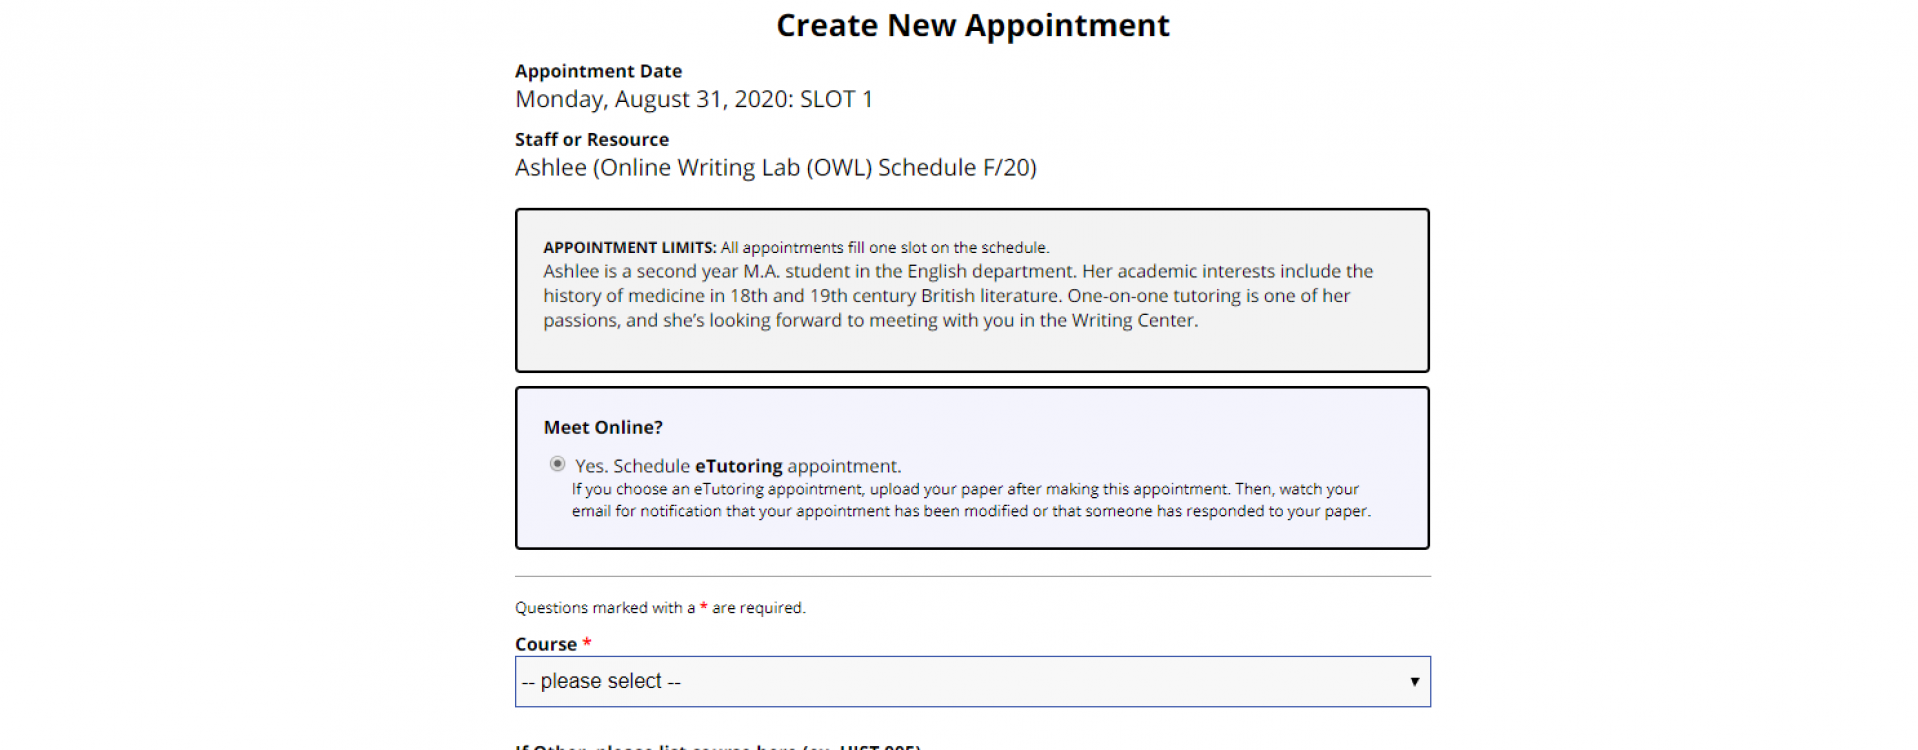 An image of the Appointment Form for the OWL Schedule.